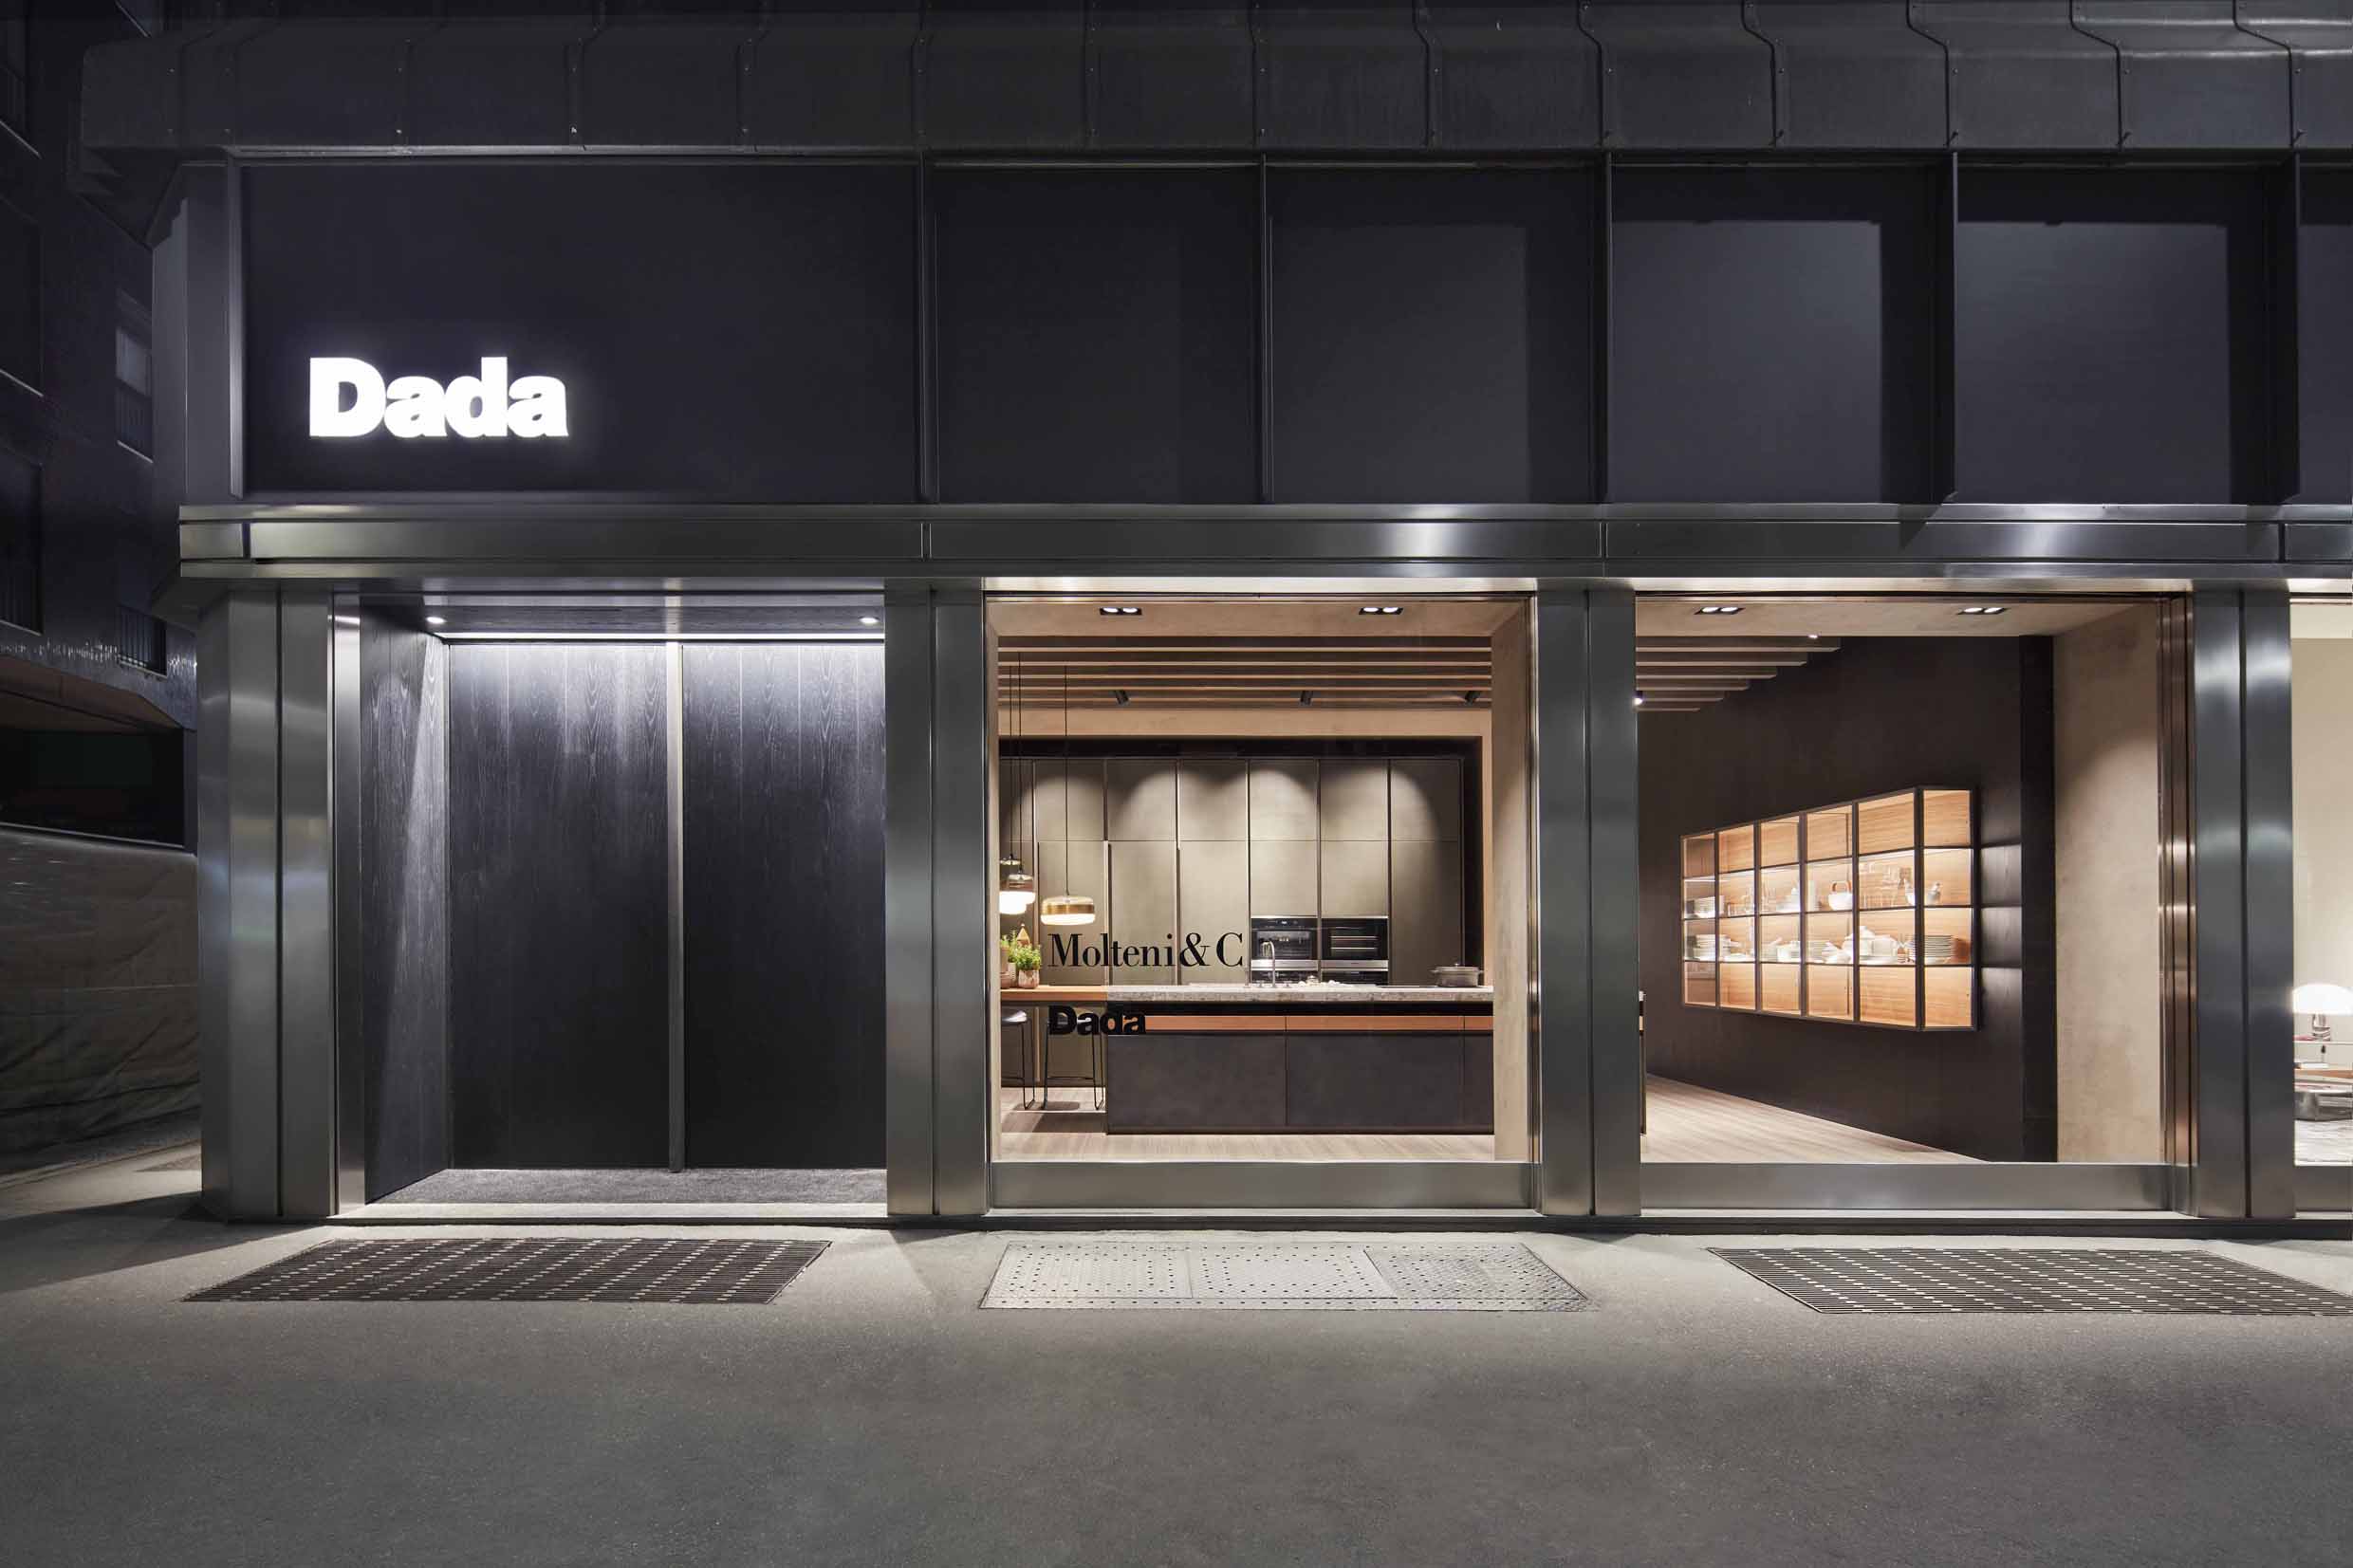 Grand opening of the first retail Concept Store designed by Vincent Van Duysen for Molteni&C | Dada